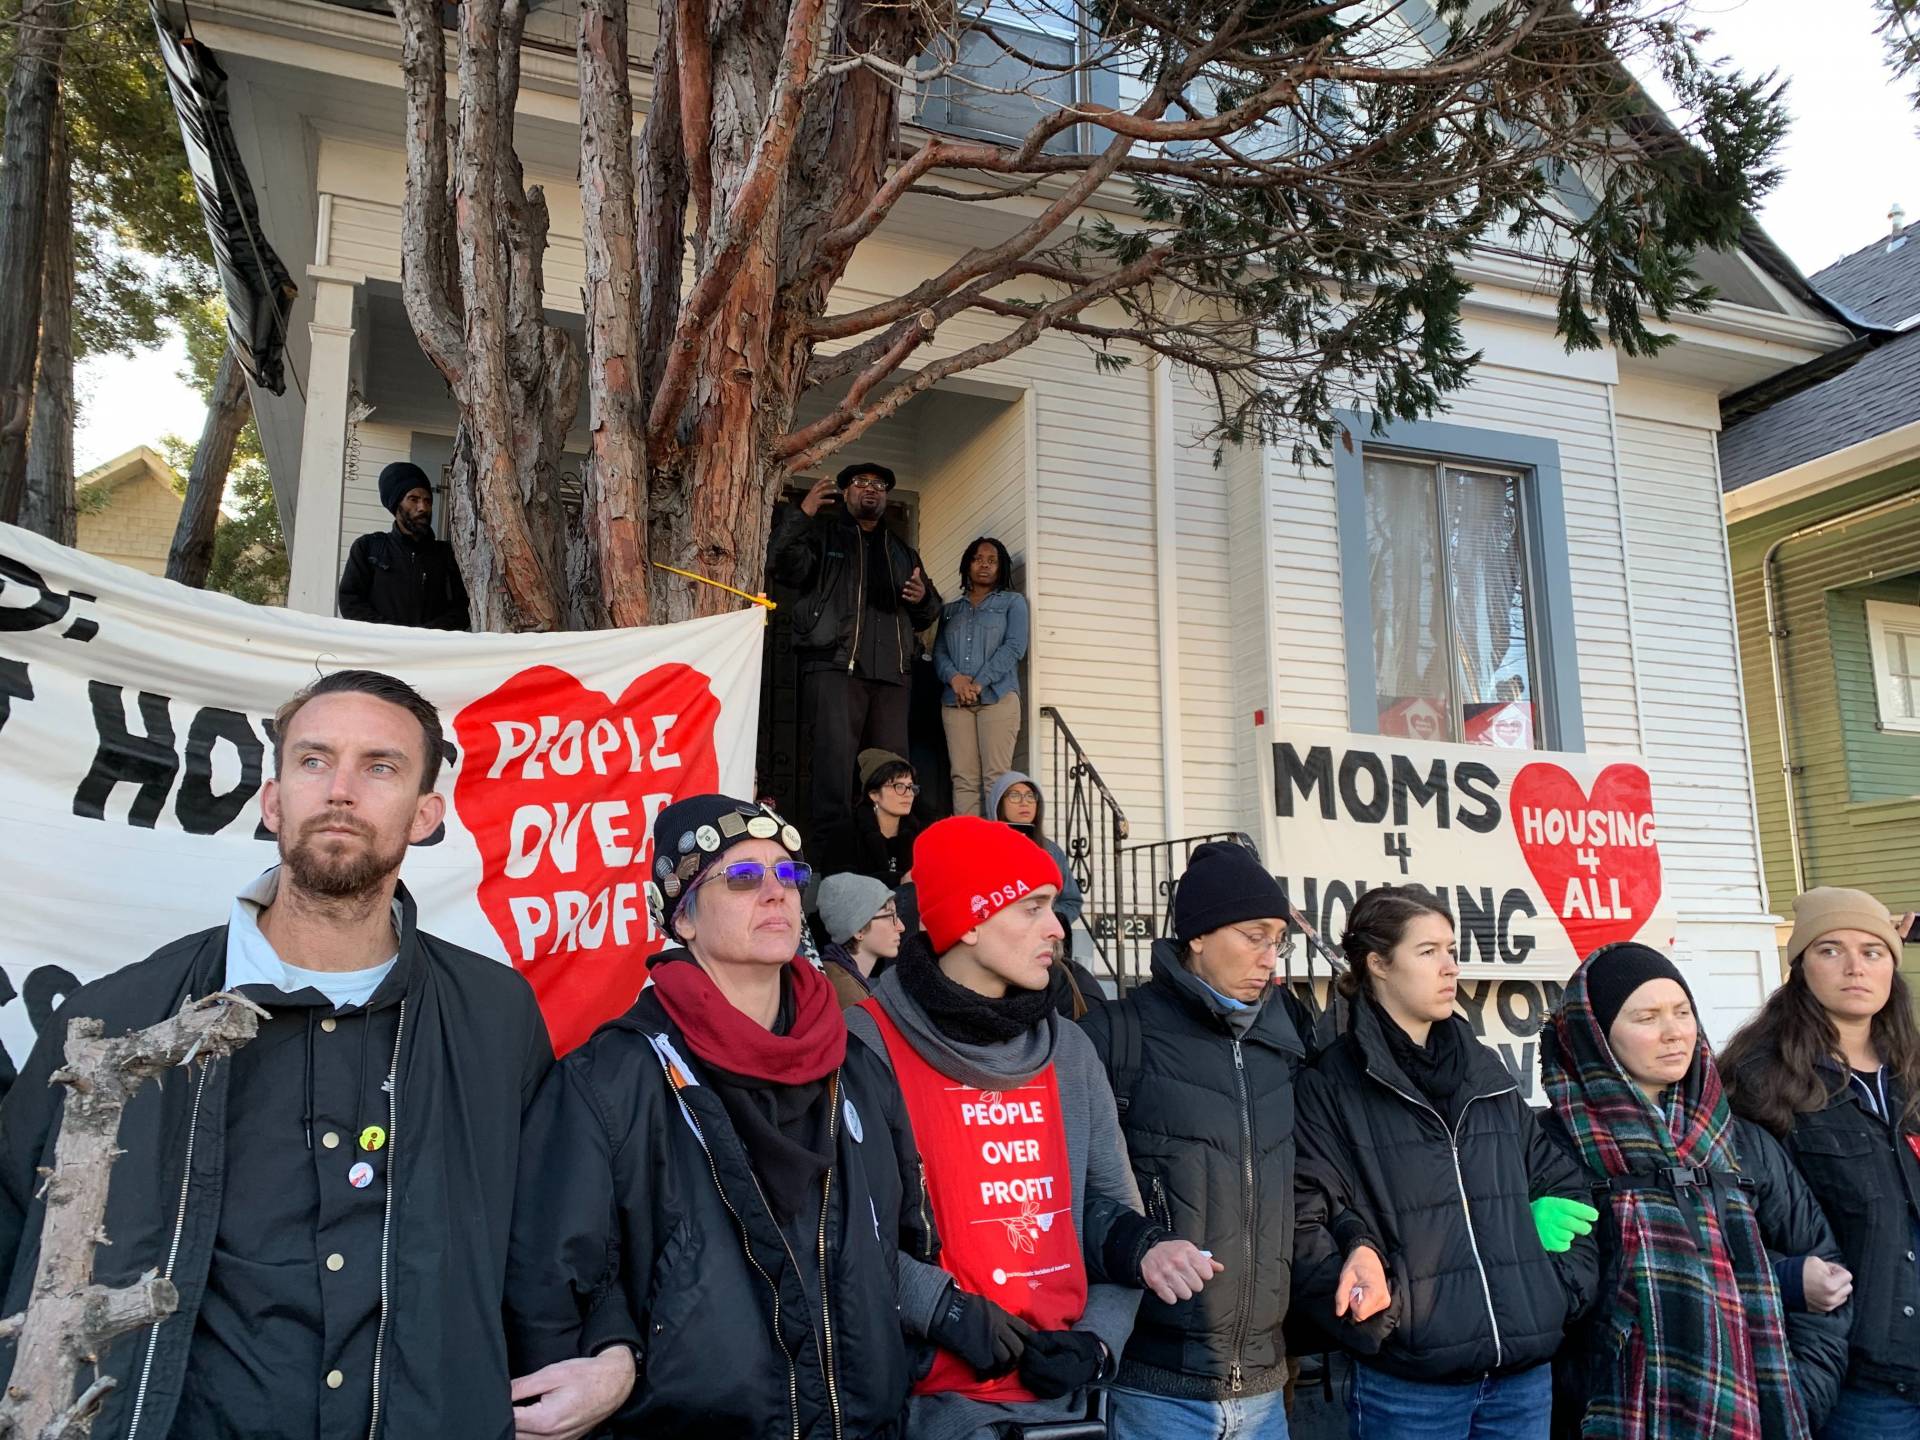 Supporters of Moms 4 Housing rally in front of the West Oakland house the group occupied for several months before being forcefully evicted in January. A community land trust has since agreed to purchase the house and allow the women move back in.